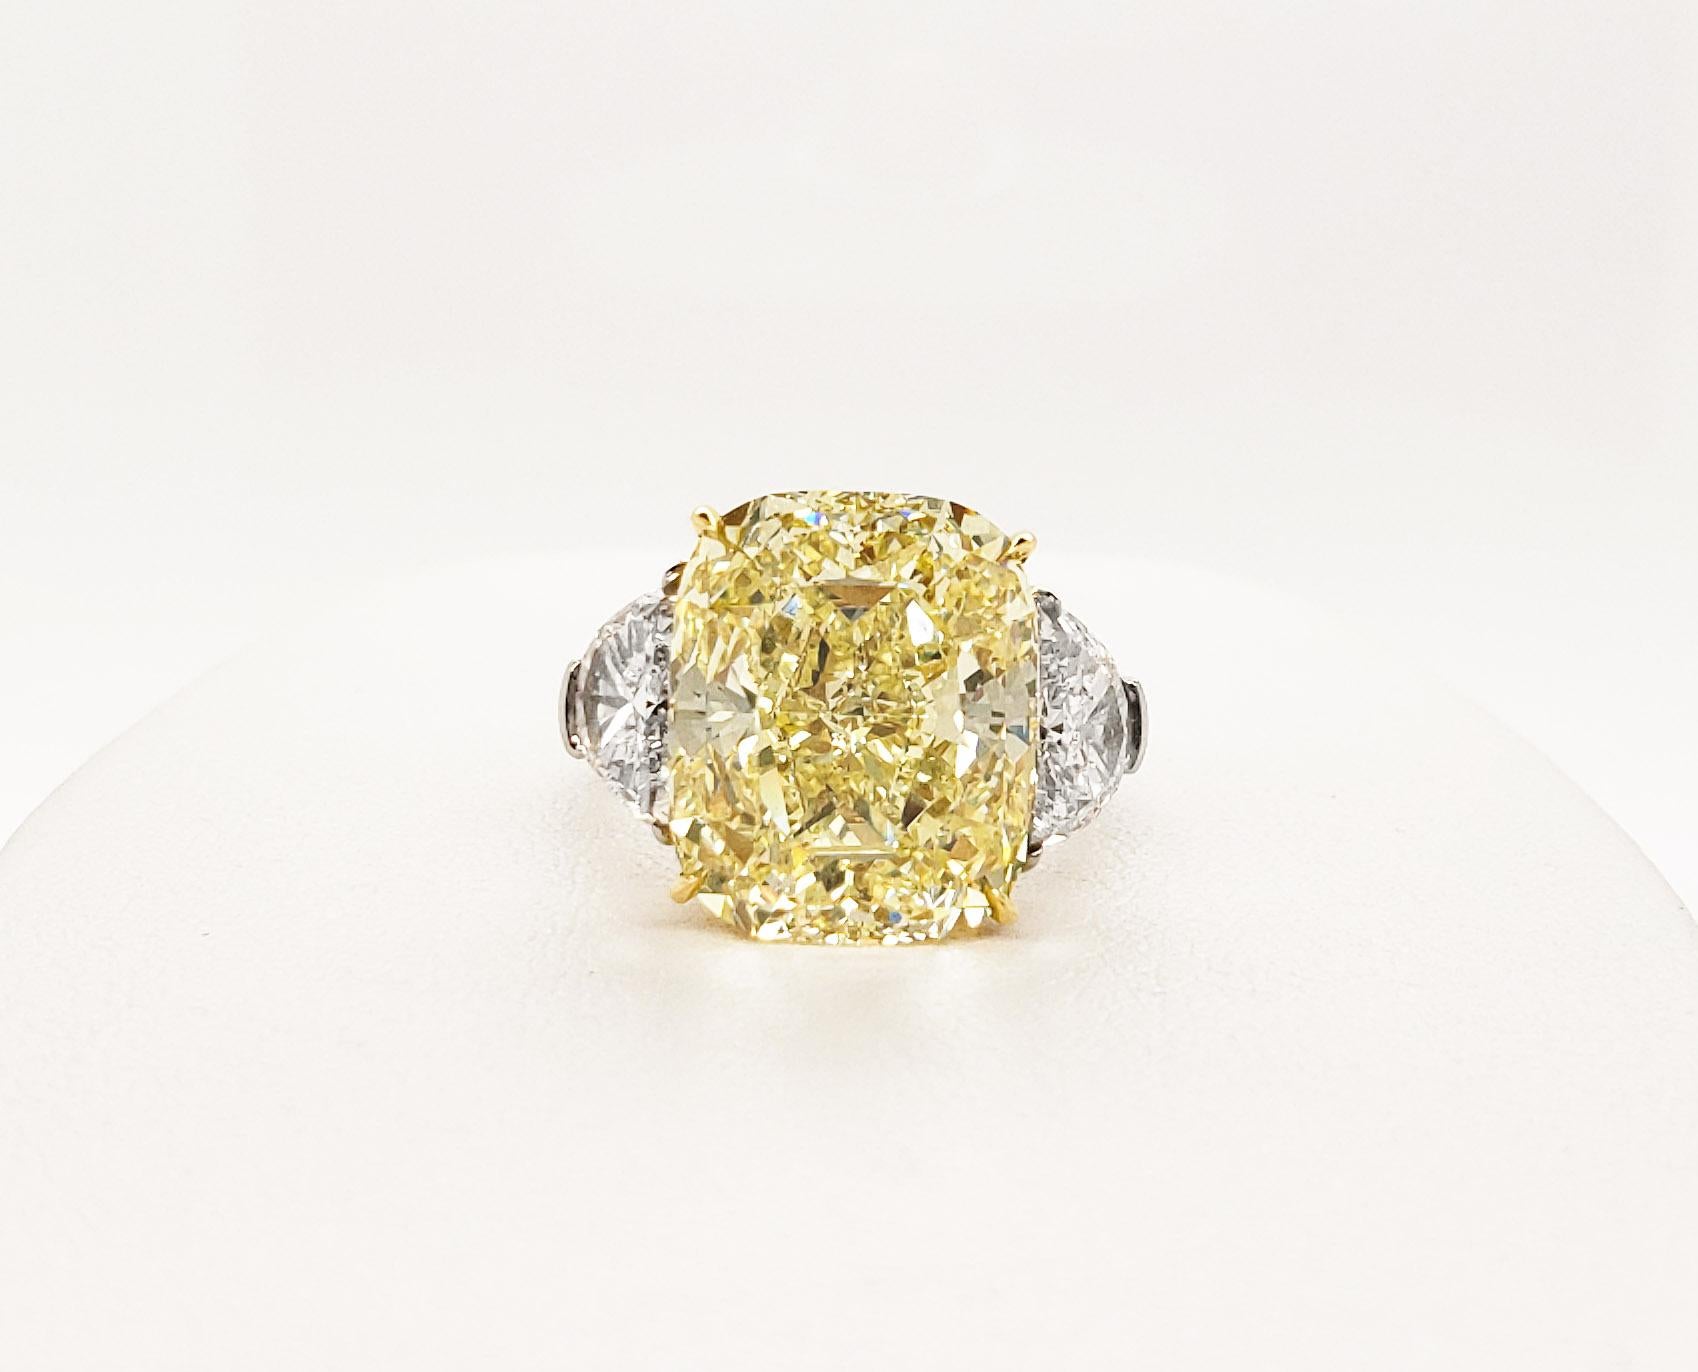 SCARSELLI 11 Carat Fancy Yellow Diamond Engagement Ring in Platinum For Sale 1